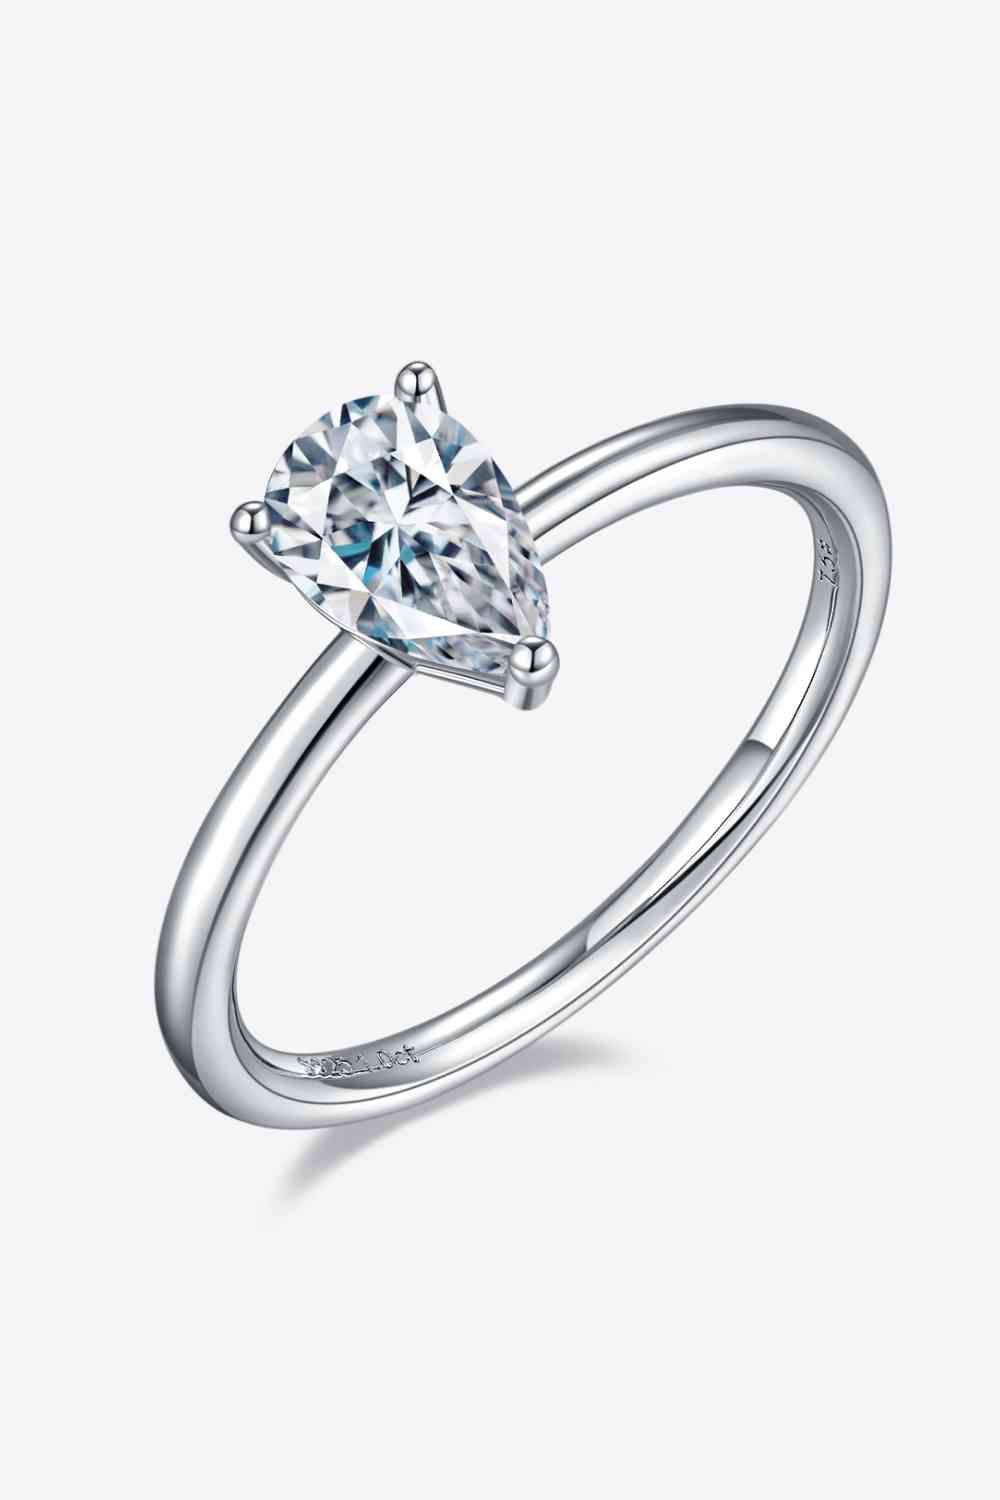 1 Carat Moissanite 925 Sterling Silver Solitaire Ring - AllIn Computer